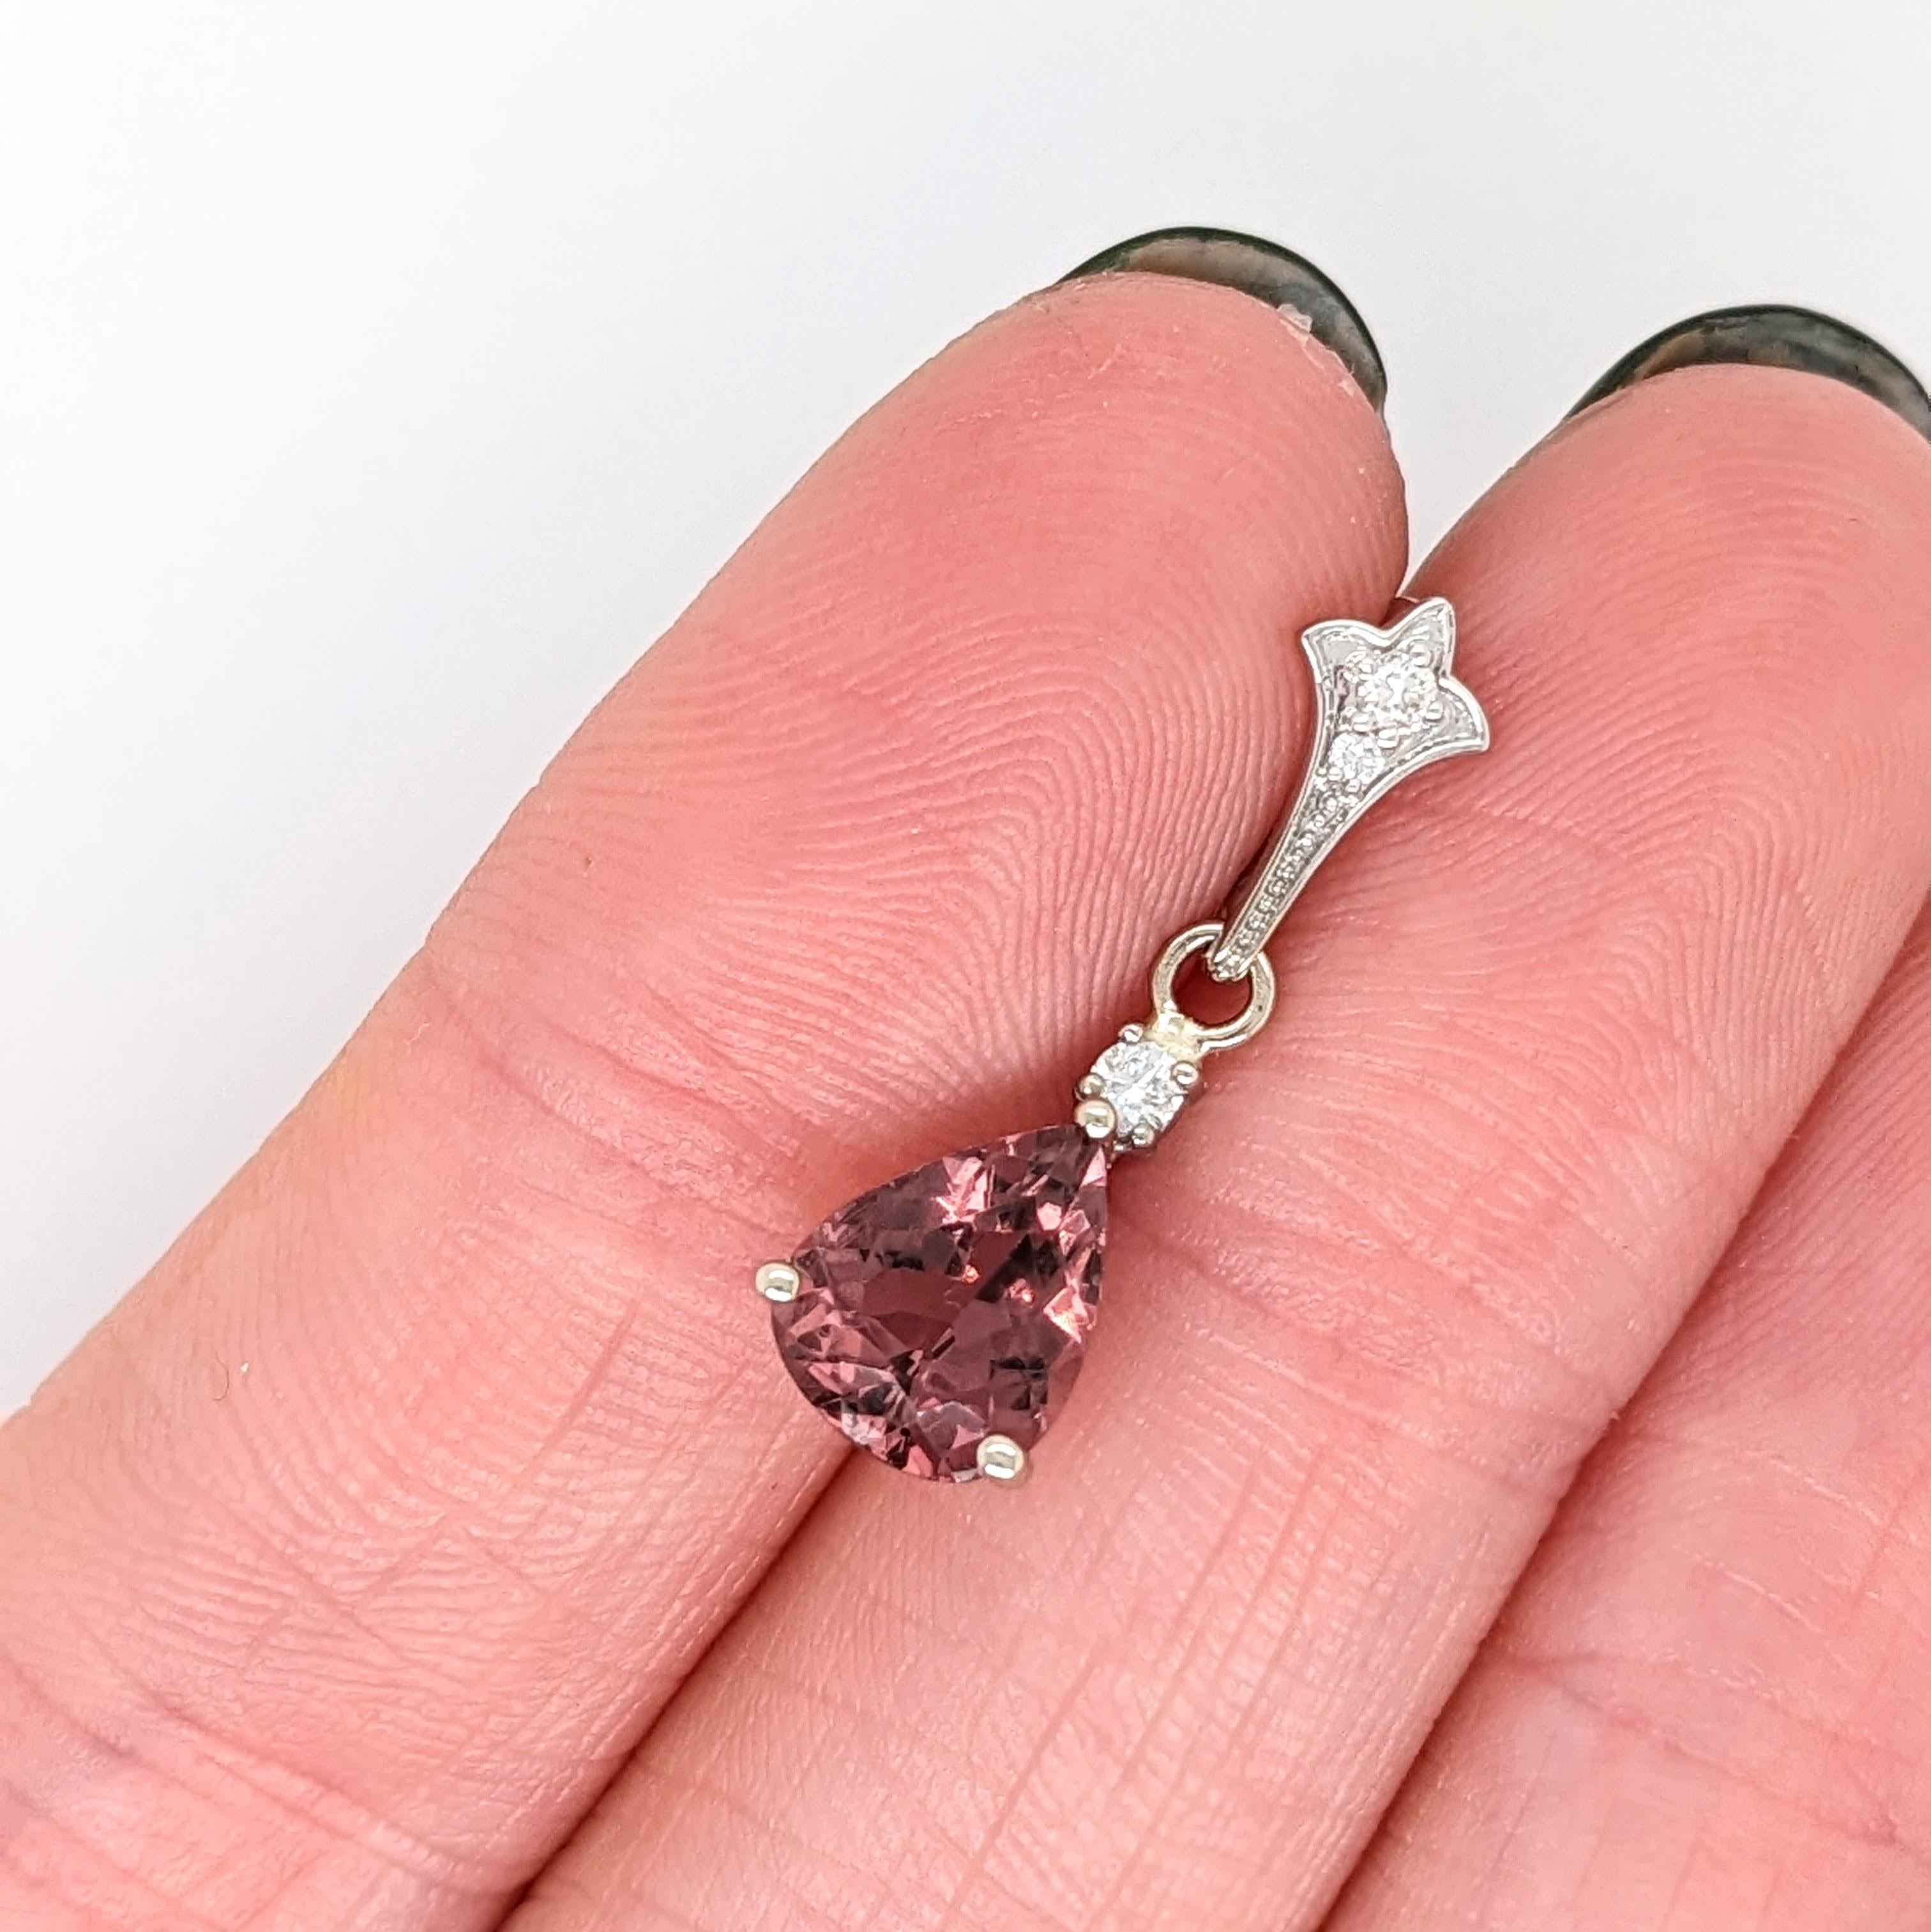 A beautiful 1.5ct tourmaline pendant in a 6x9mm pear shape with natural diamond accents for a lovely added shine! This lovely pendant can make an October birthstone for your loved ones! 

Specifications

Item Type: Pendant
Centre